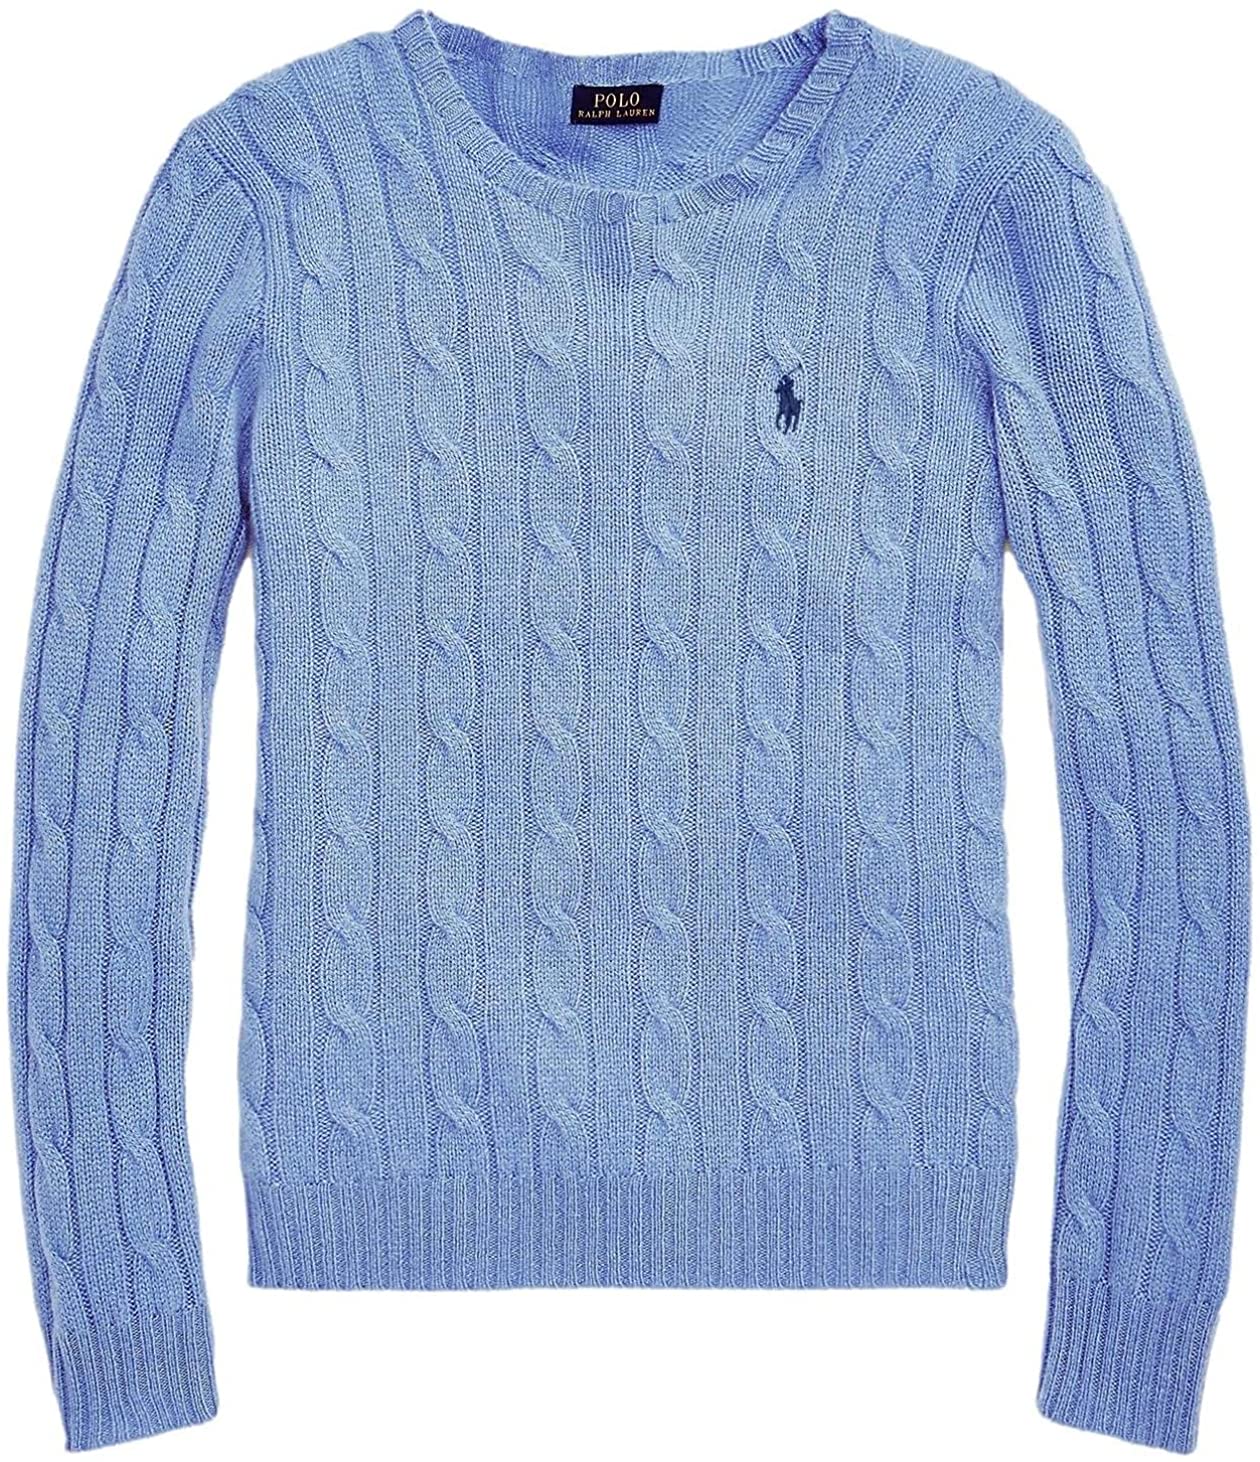 Polo Ralph Lauren Womens Cable Knit V-Neck Sweater